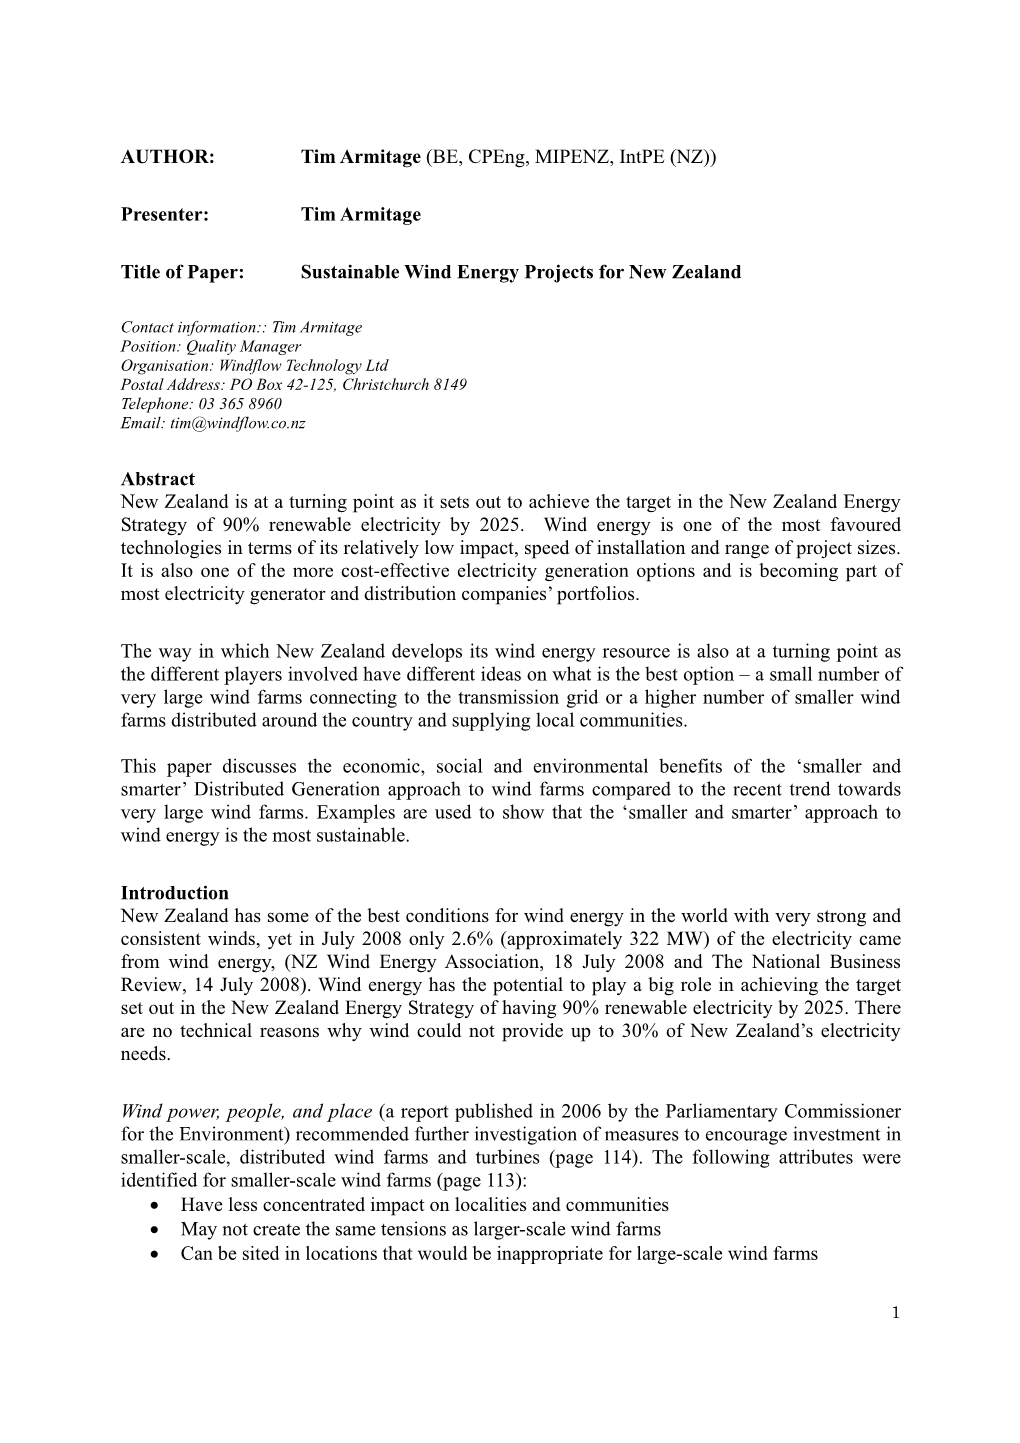 Tim Armitage Title of Paper: Sustainable Wind Energy Projec